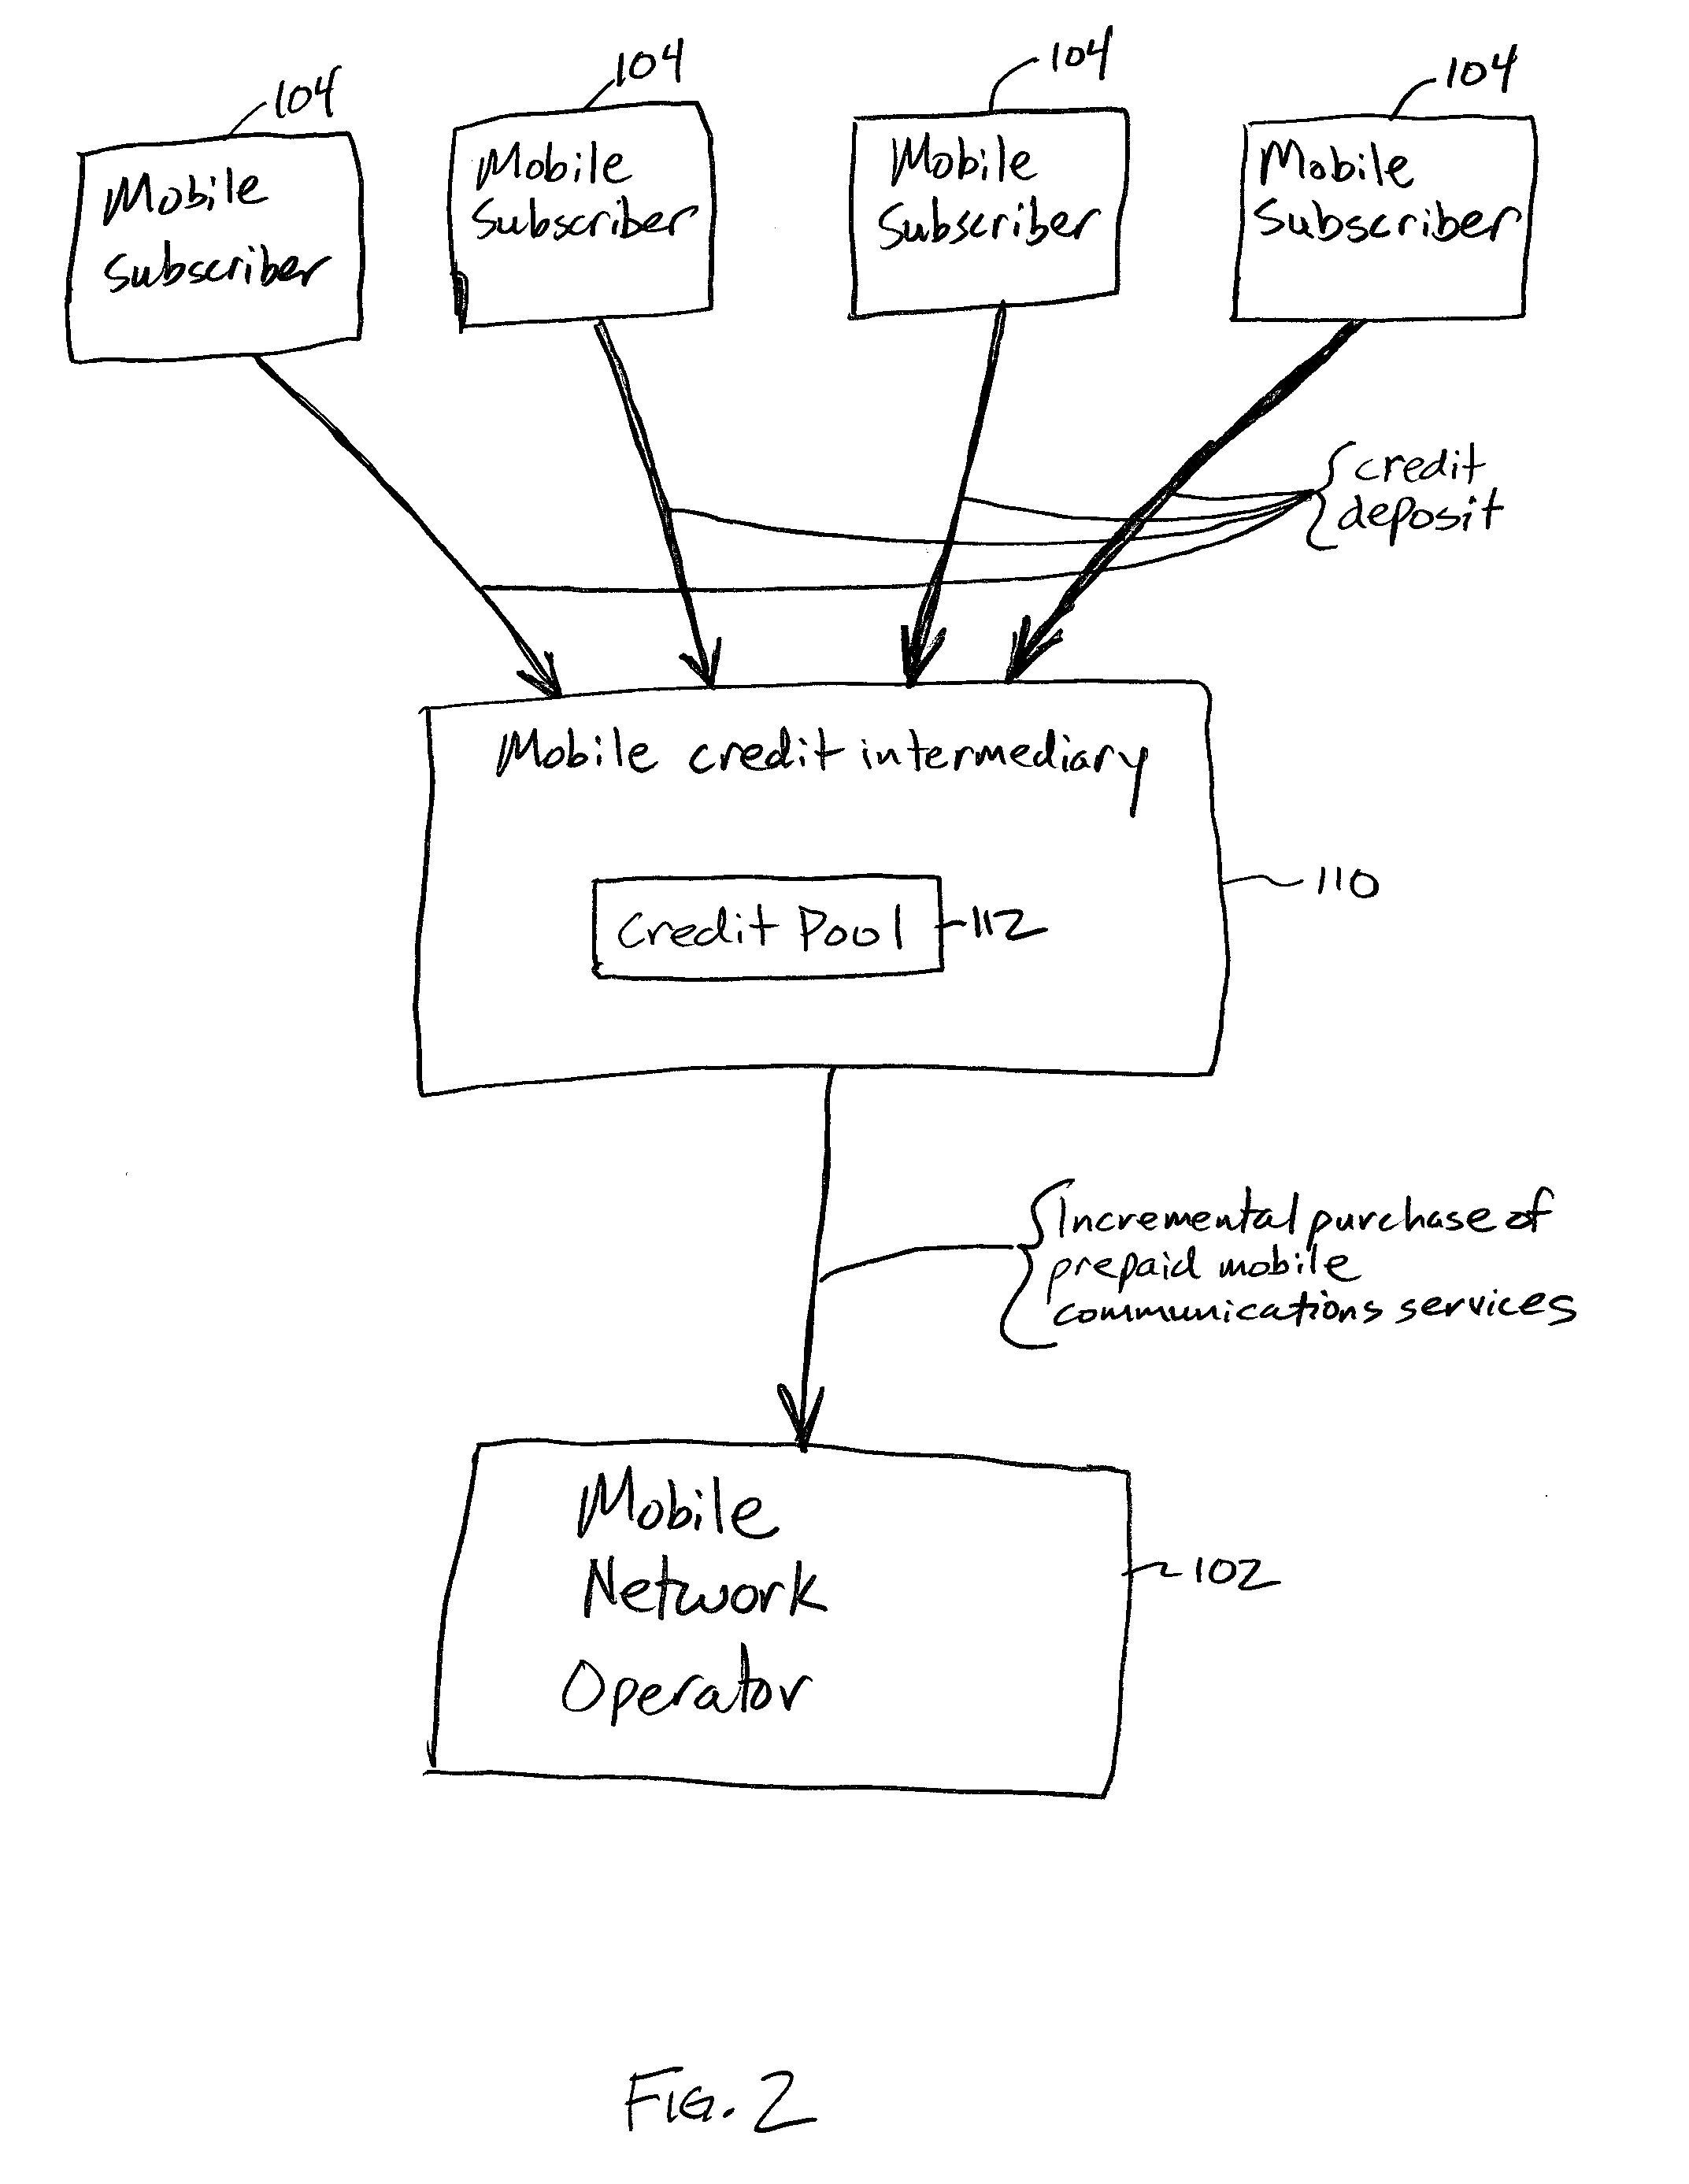 Method and system for managing credit for subscribers of mobile communications services